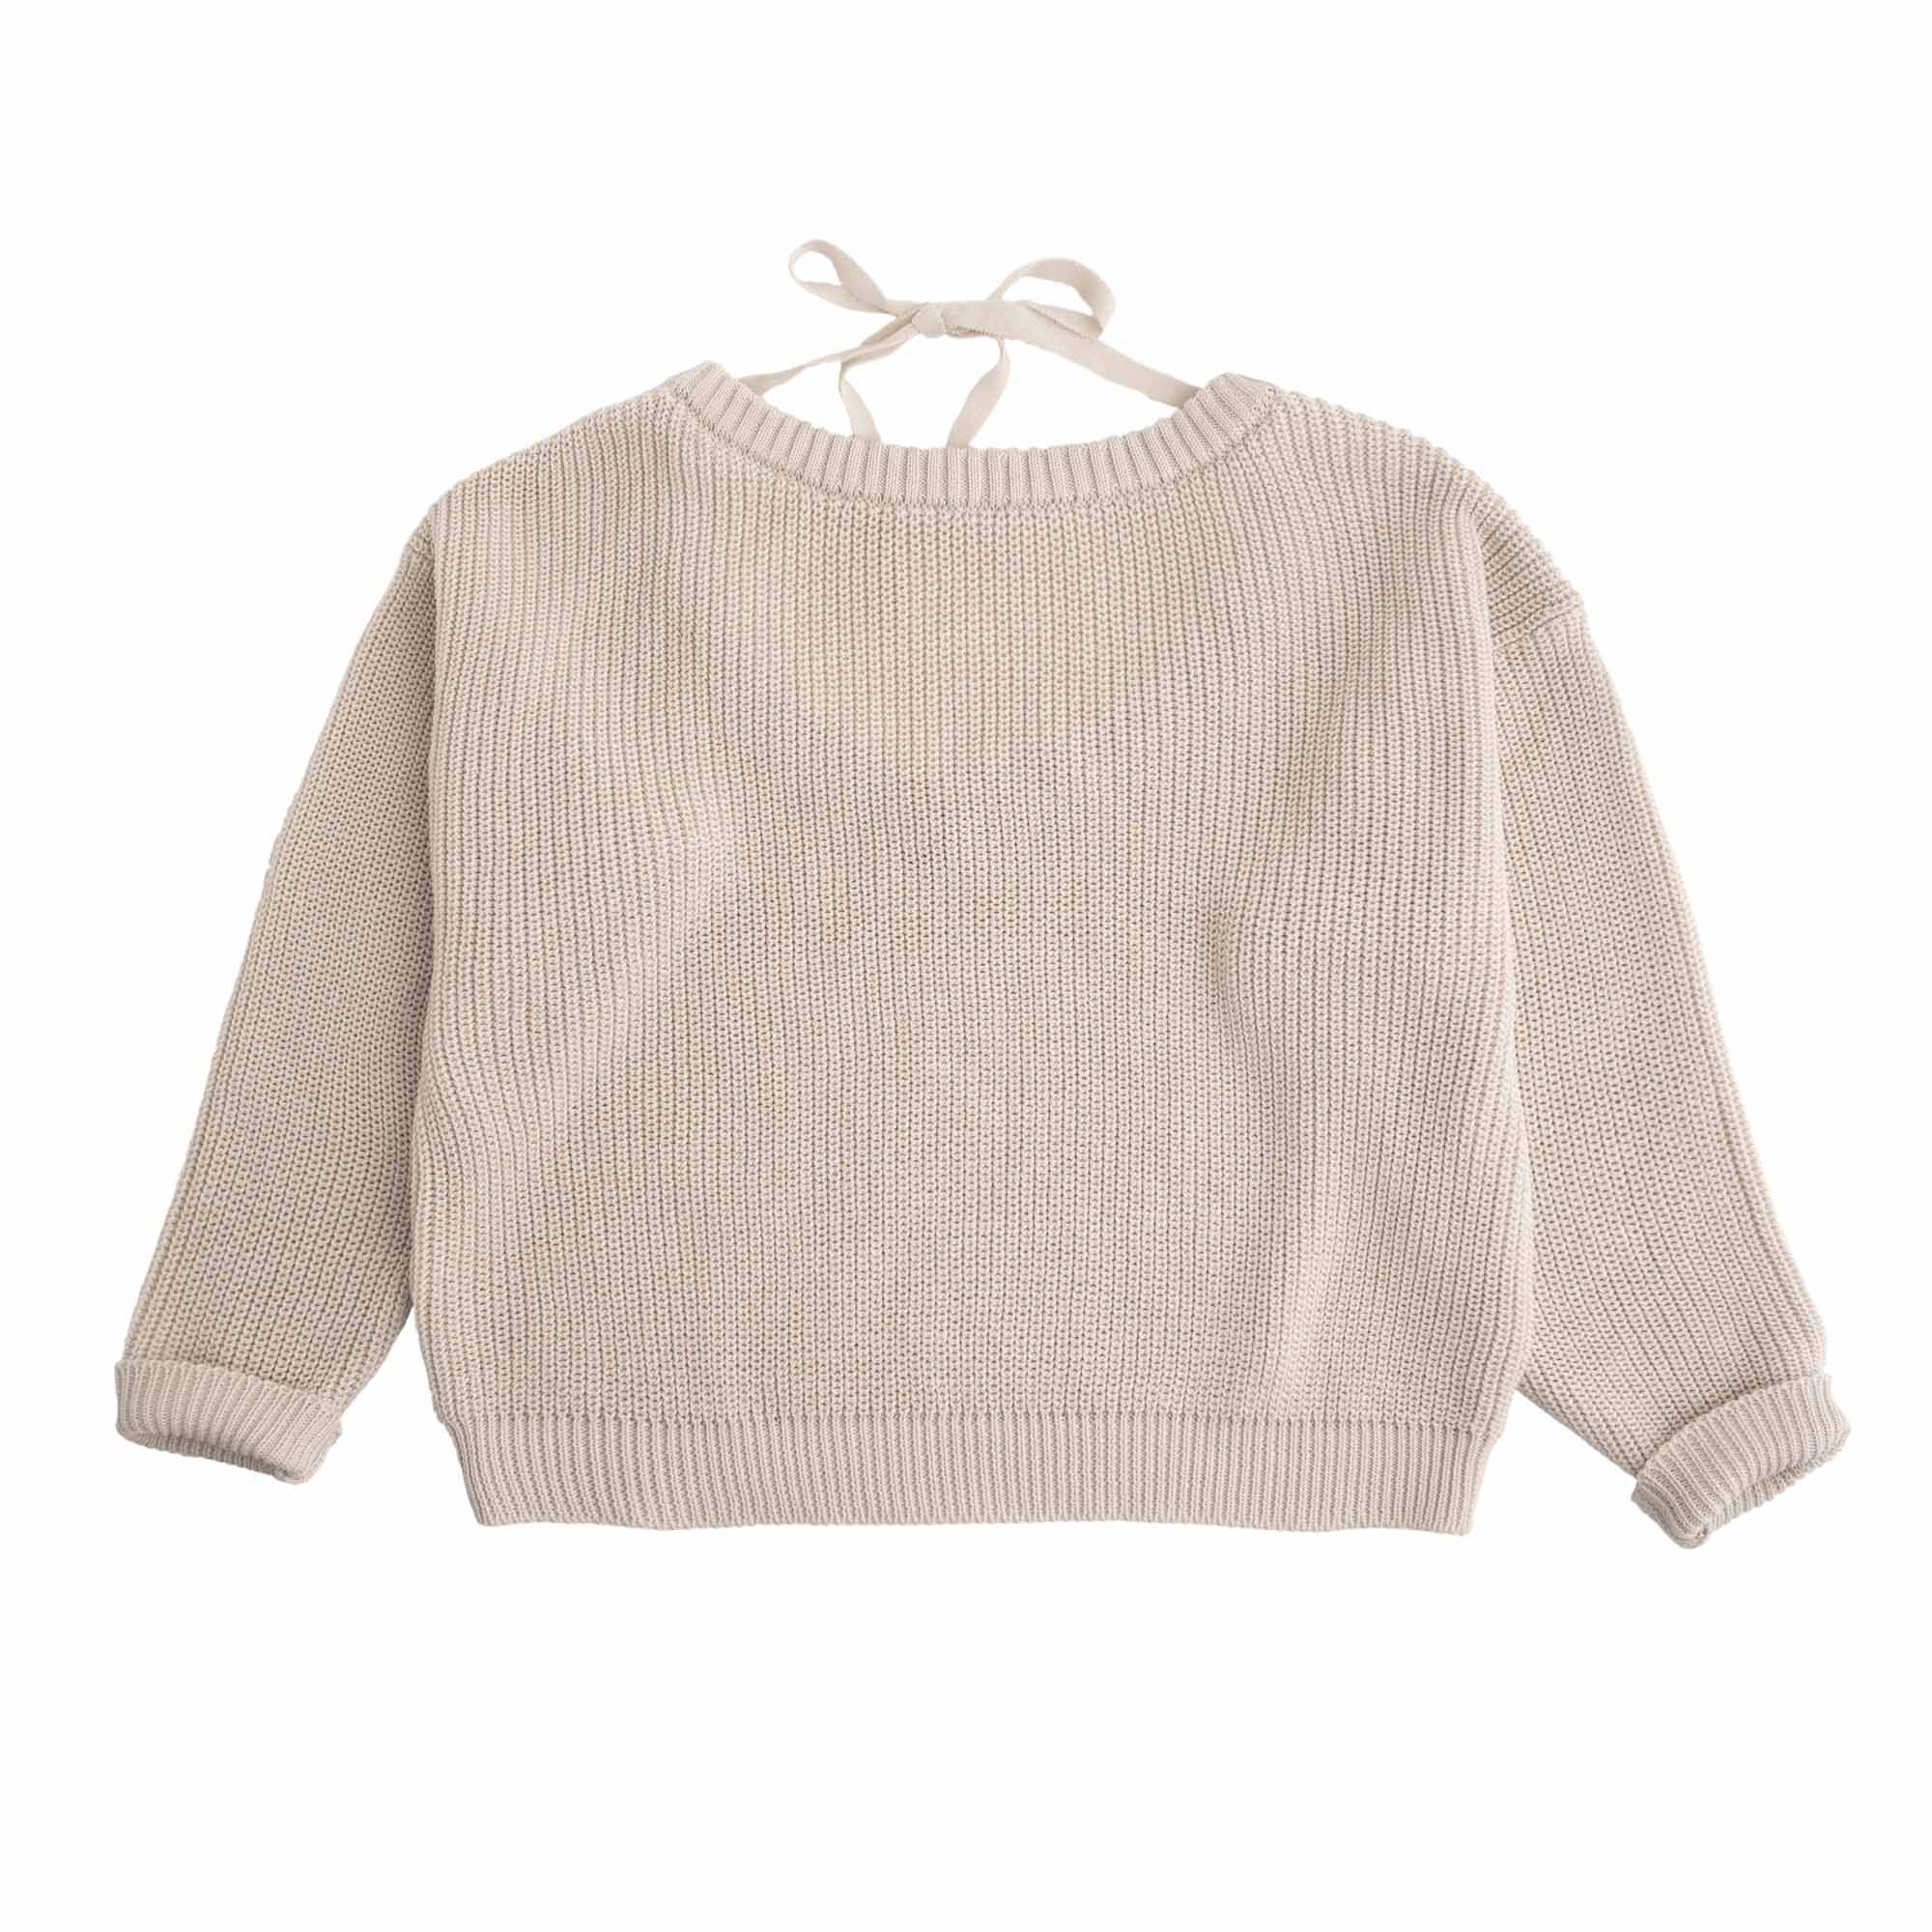 Tocoto Vintage Knitted Jersey - Off-White